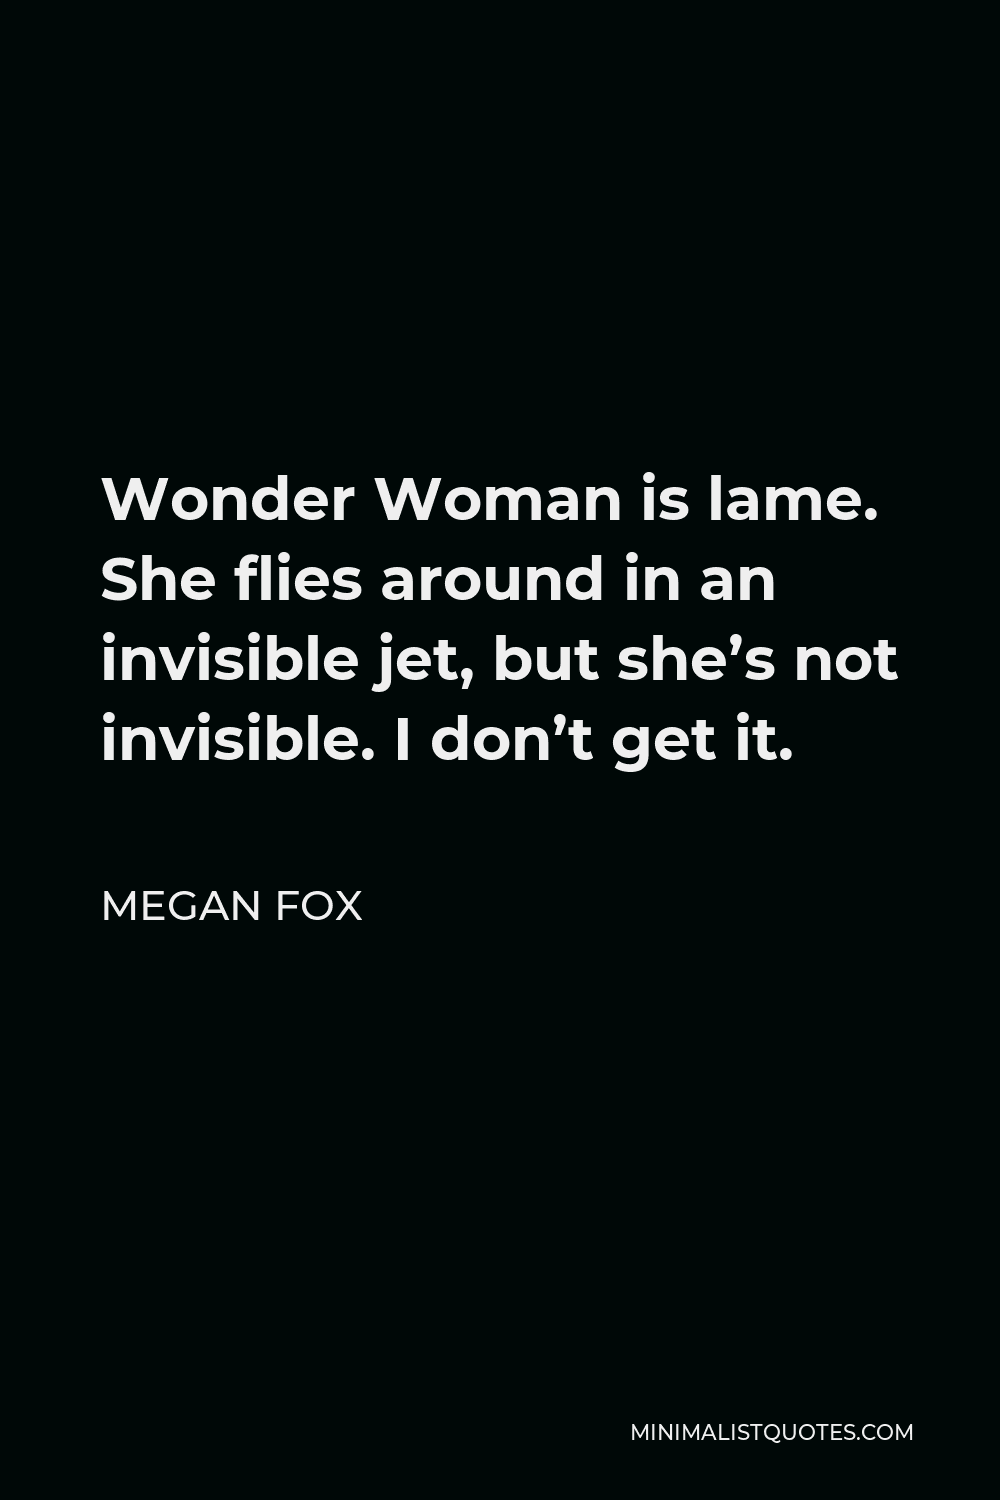 Megan Fox Quote - Wonder Woman is lame. She flies around in an invisible jet, but she’s not invisible. I don’t get it.